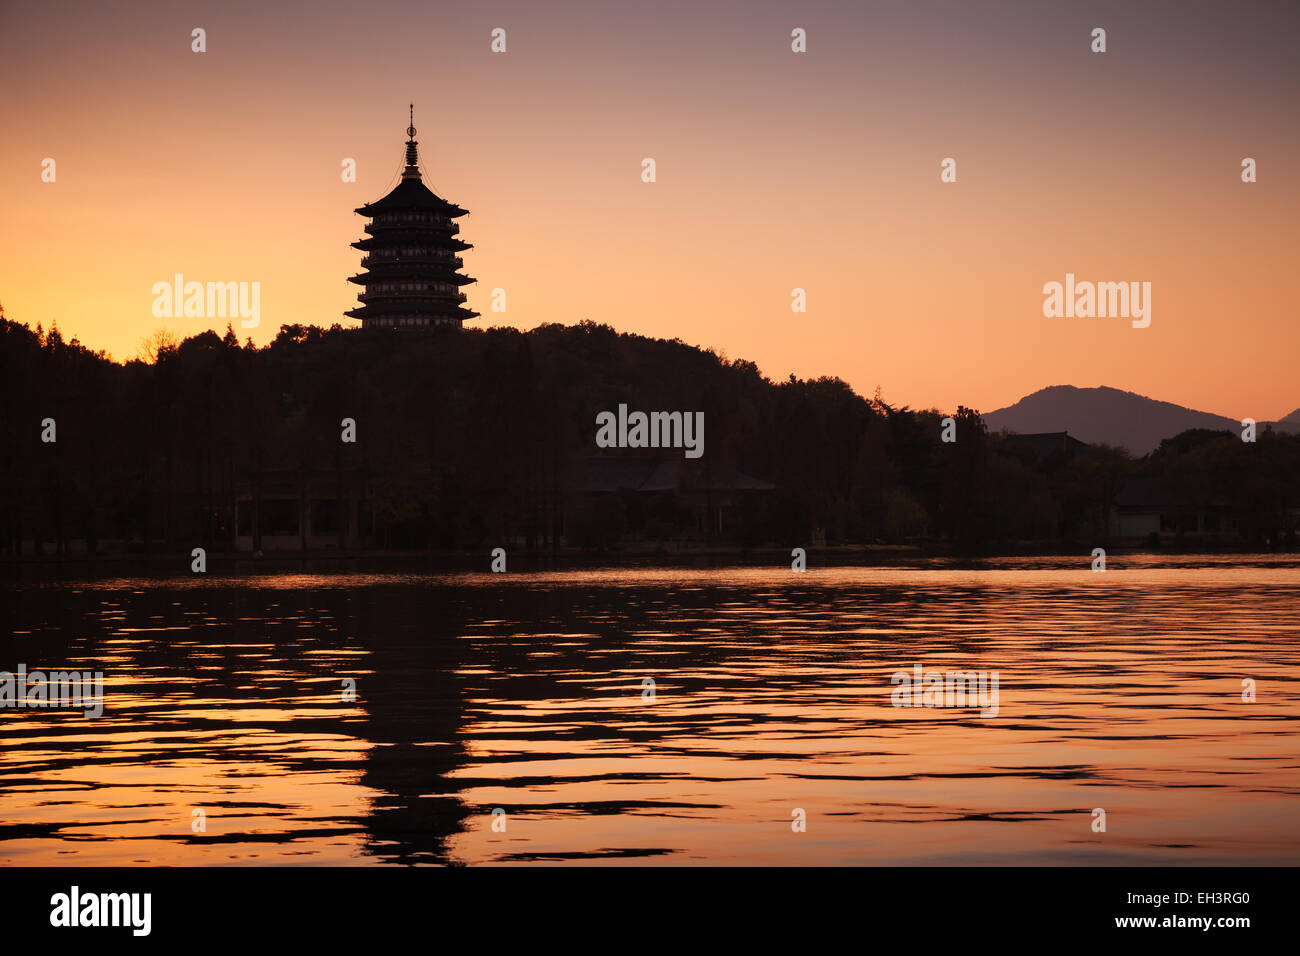 Black silhouette of traditional Chinese pagoda on orange evening sky background. Coast of West Lake. Famous park in Hangzhou cit Stock Photo